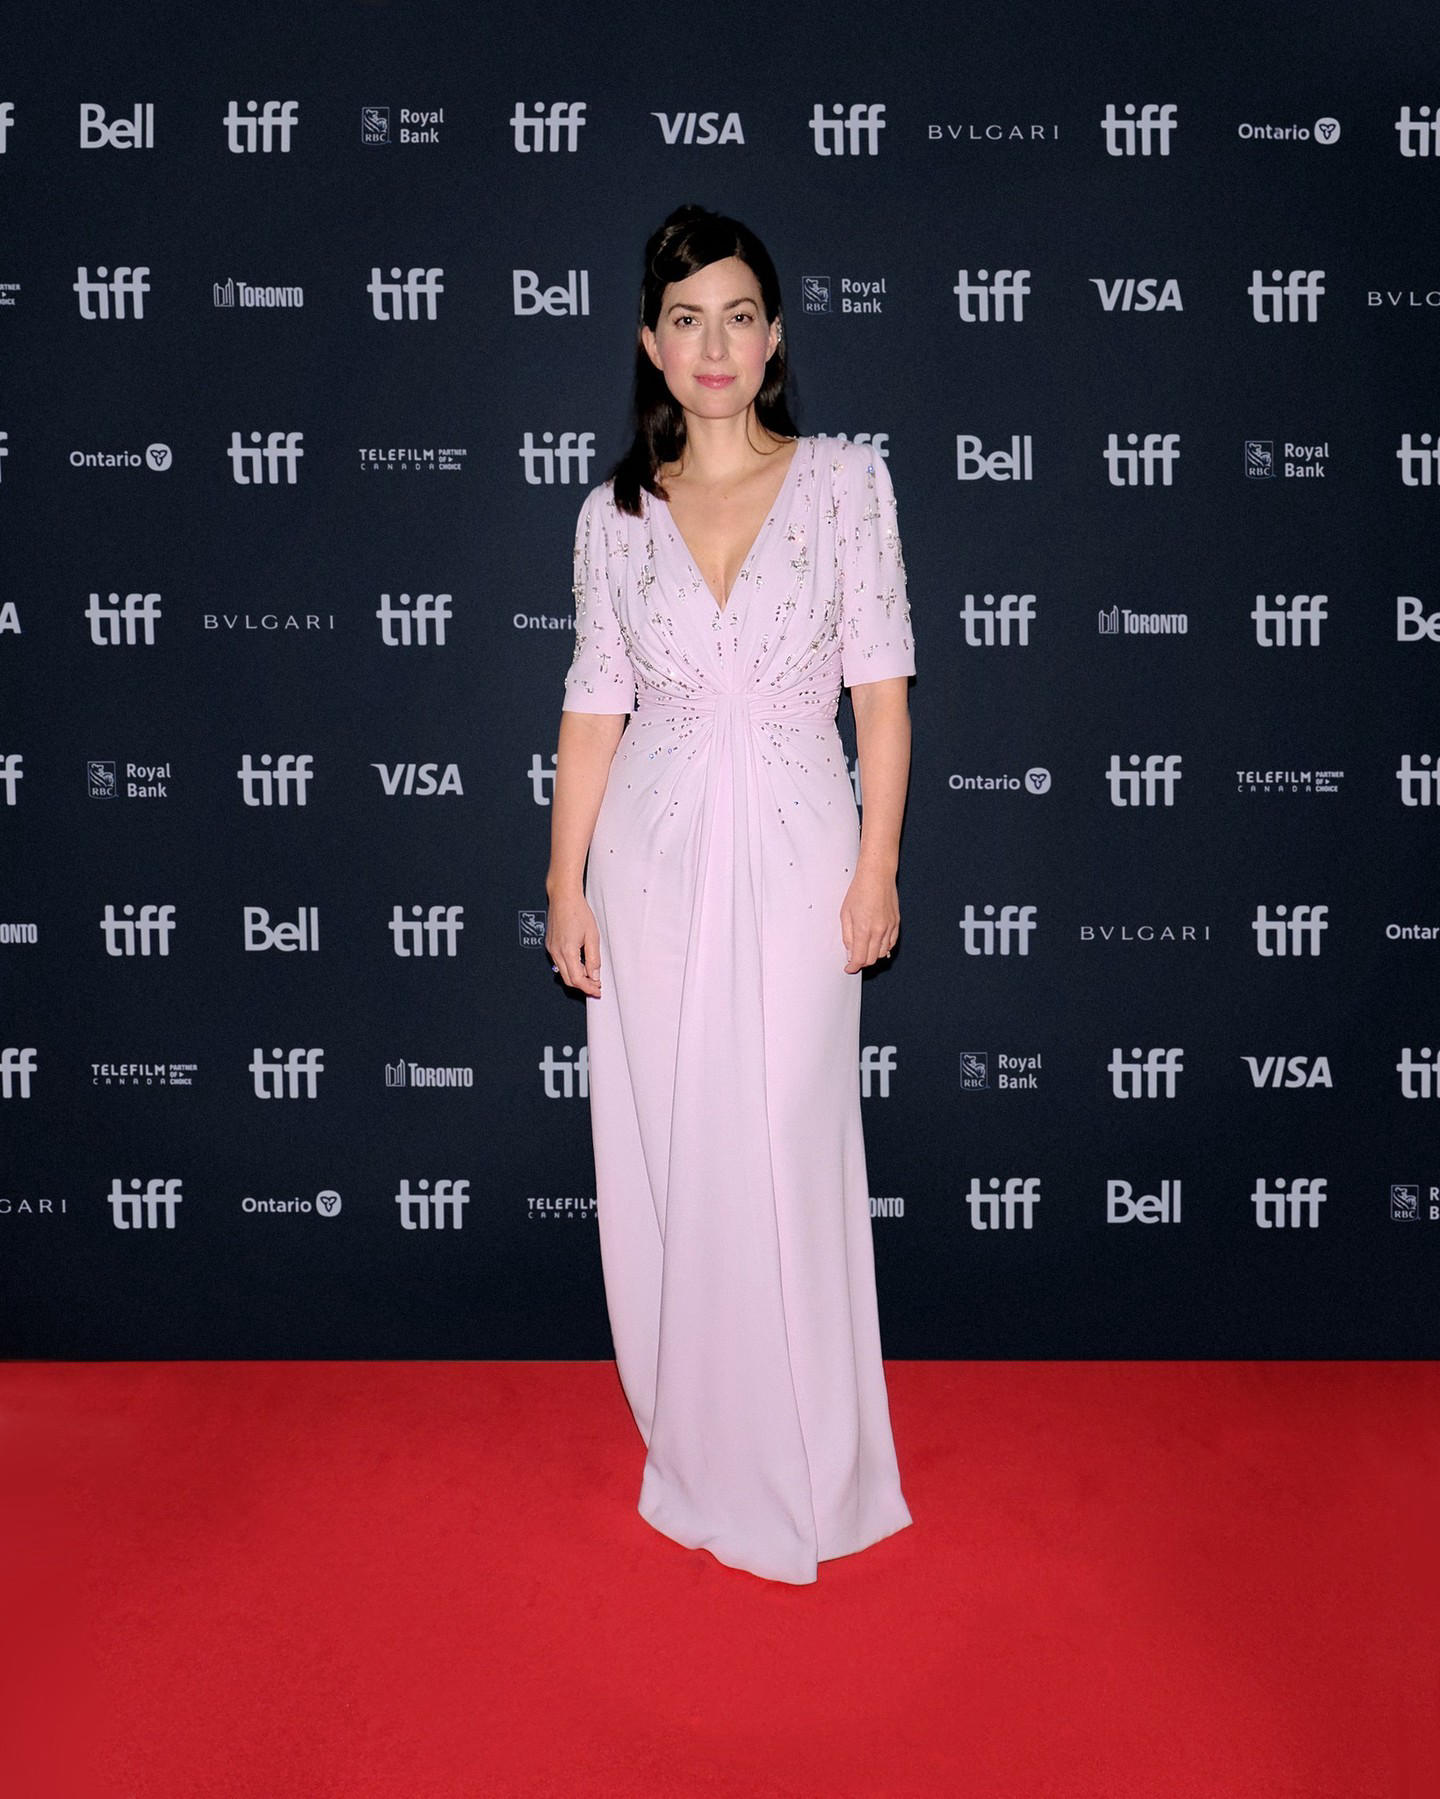 Prada - Rebecca Zlotowski wore a #Prada pink crêpe de chine gown, embellished with embroideries of c